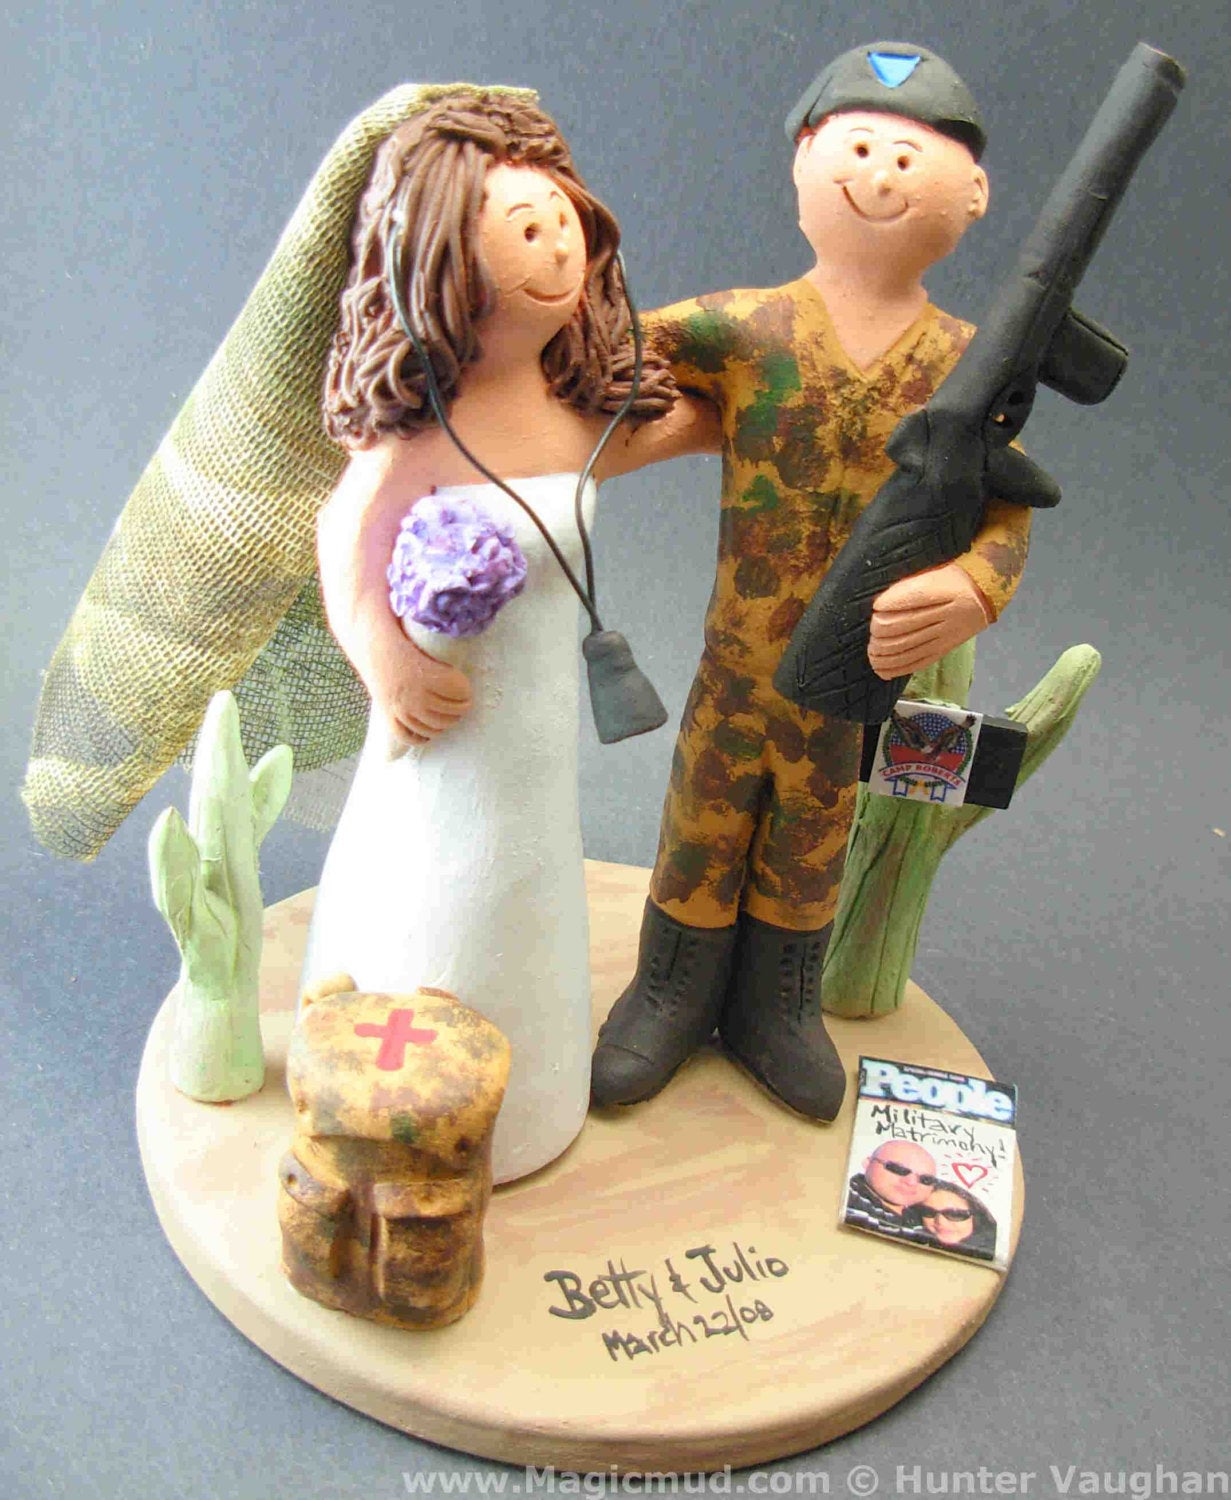 Bride with Camouflage Veil Wedding Cake Topper, Soldier's Wedding Anniversary Cake Topper, Military Wedding Anniversary Gift/CakeTopper, - iWeddingCakeToppers